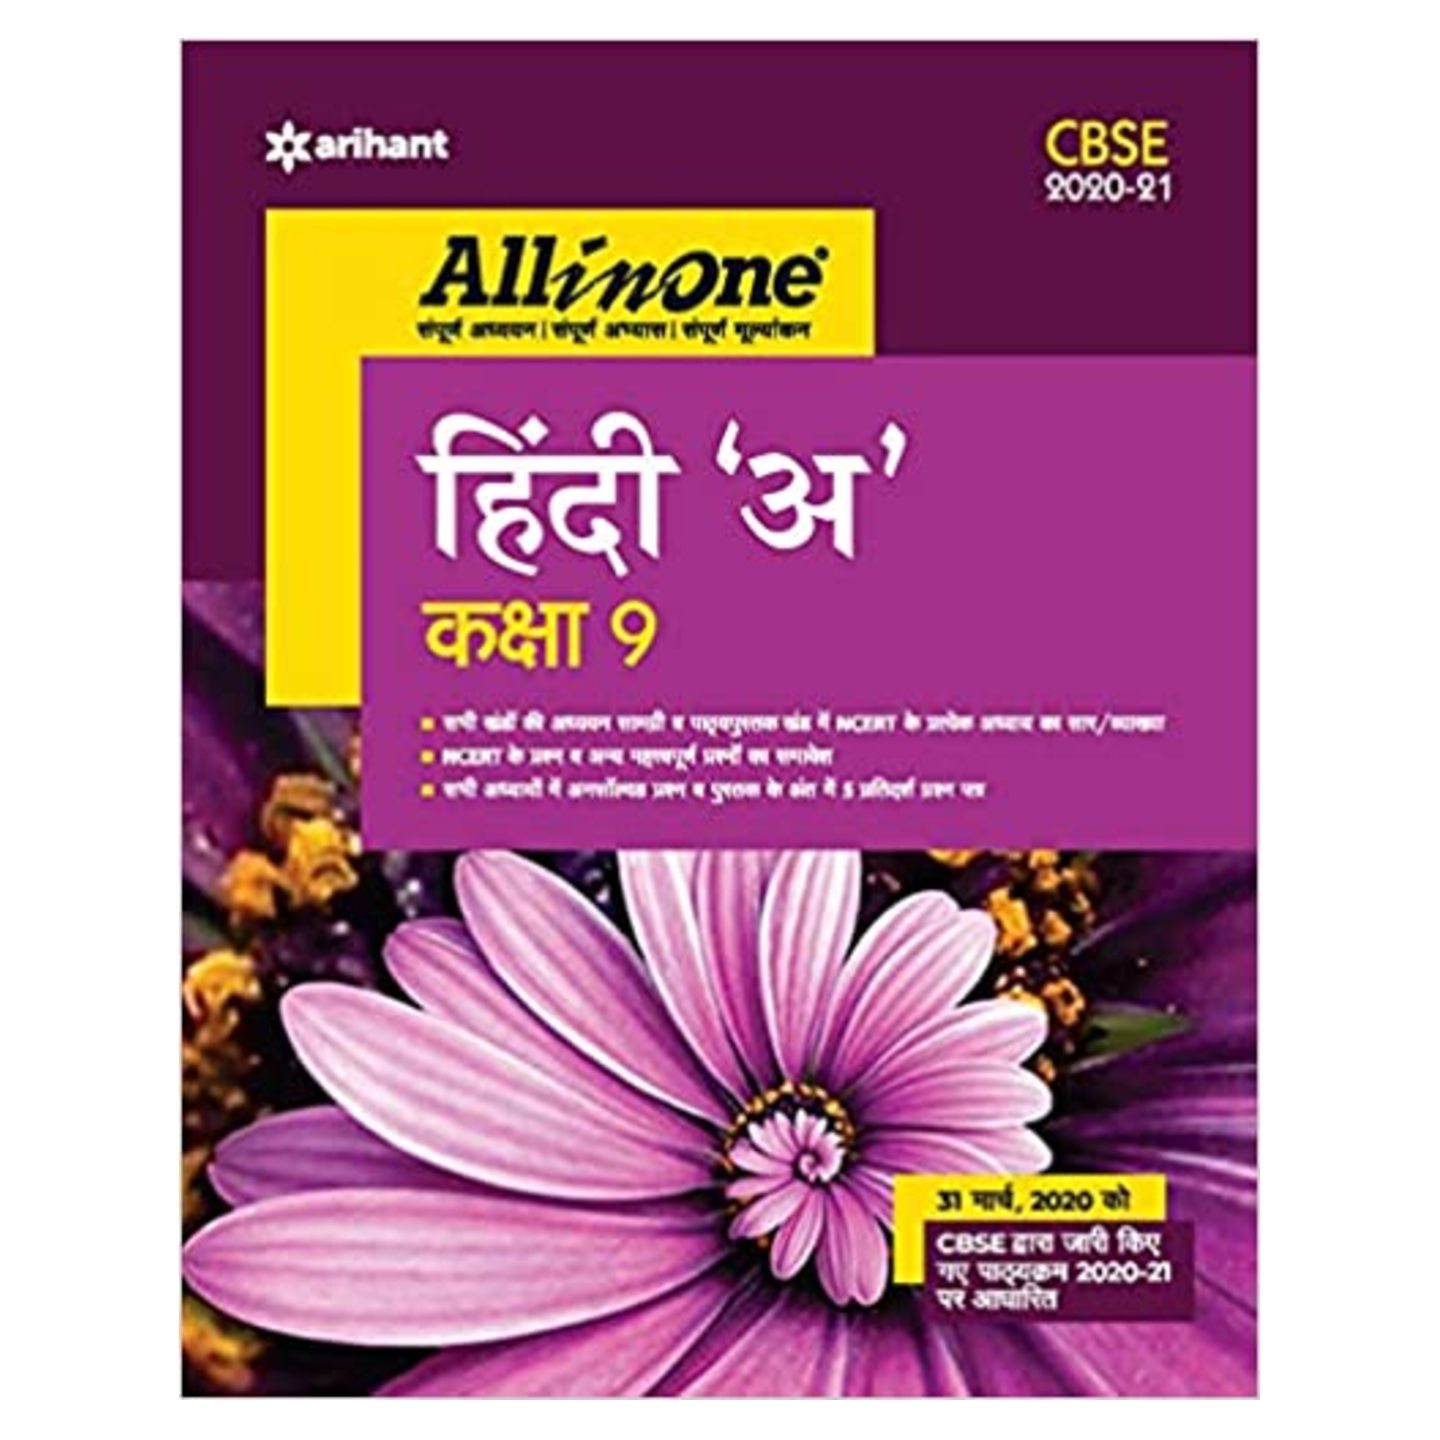 See this image CBSE All In One Hindi A Class 9